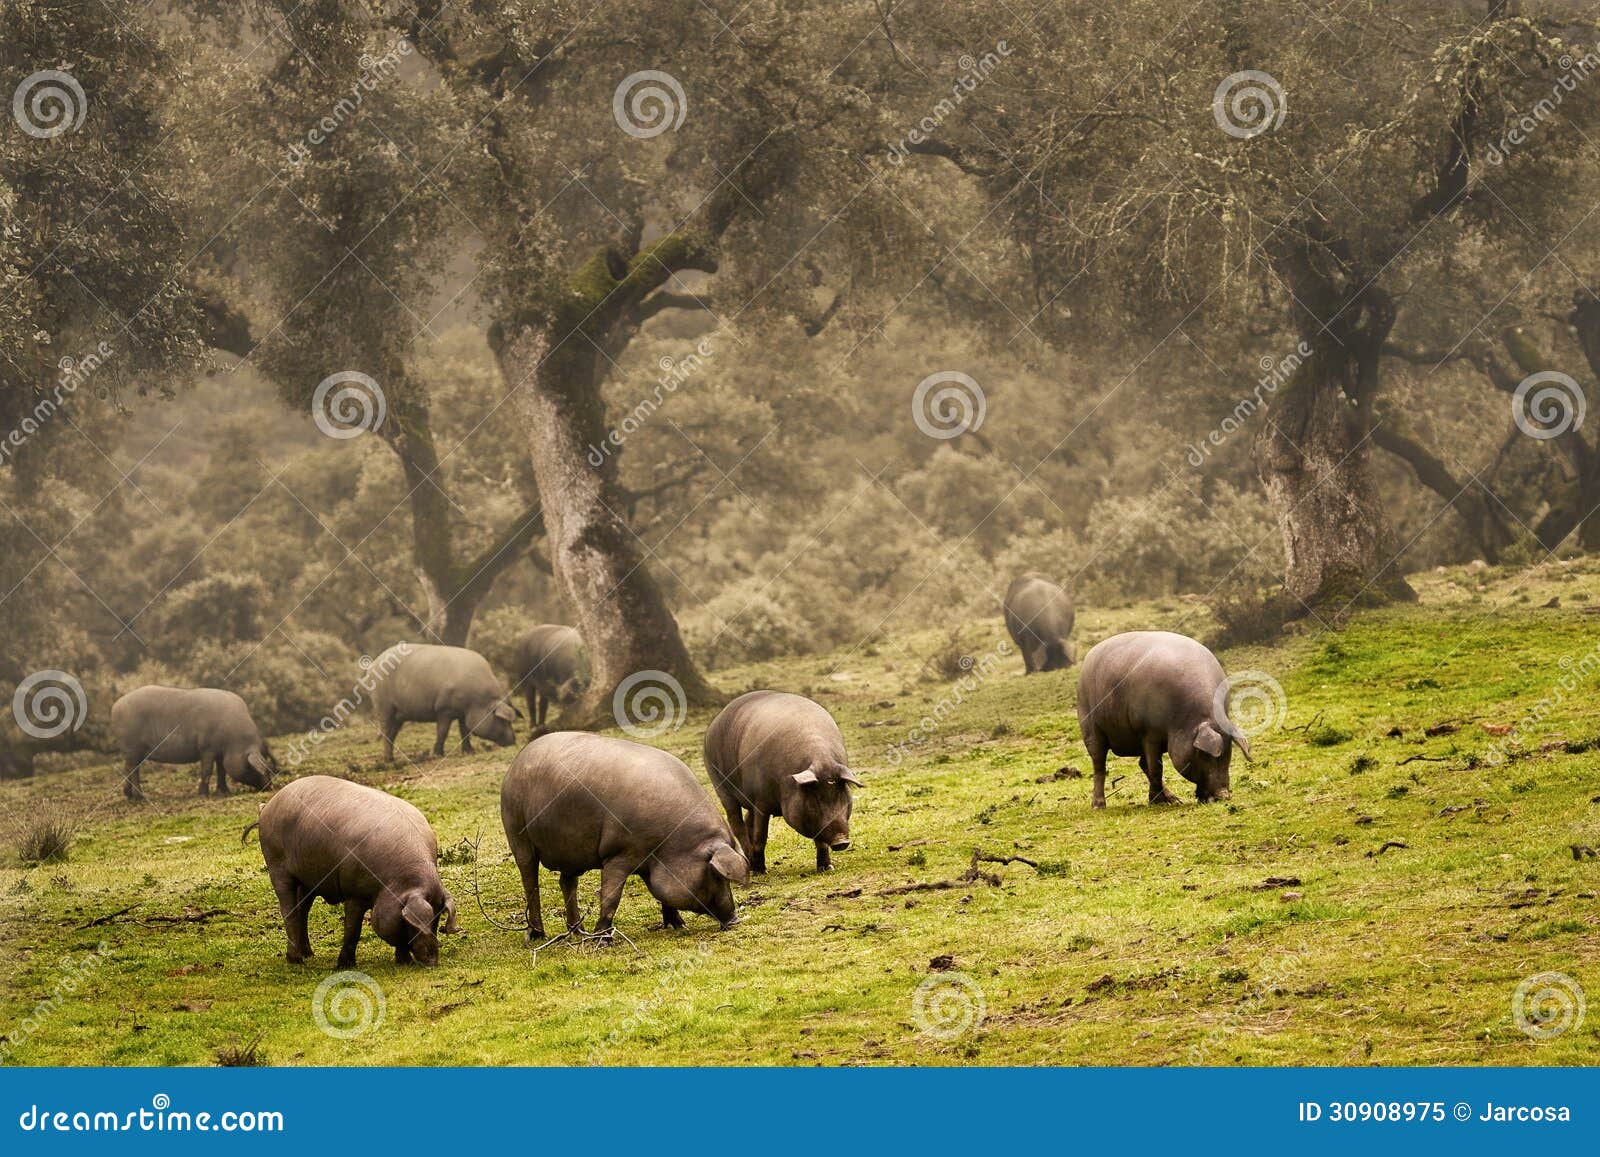 iberian pig in the meadow